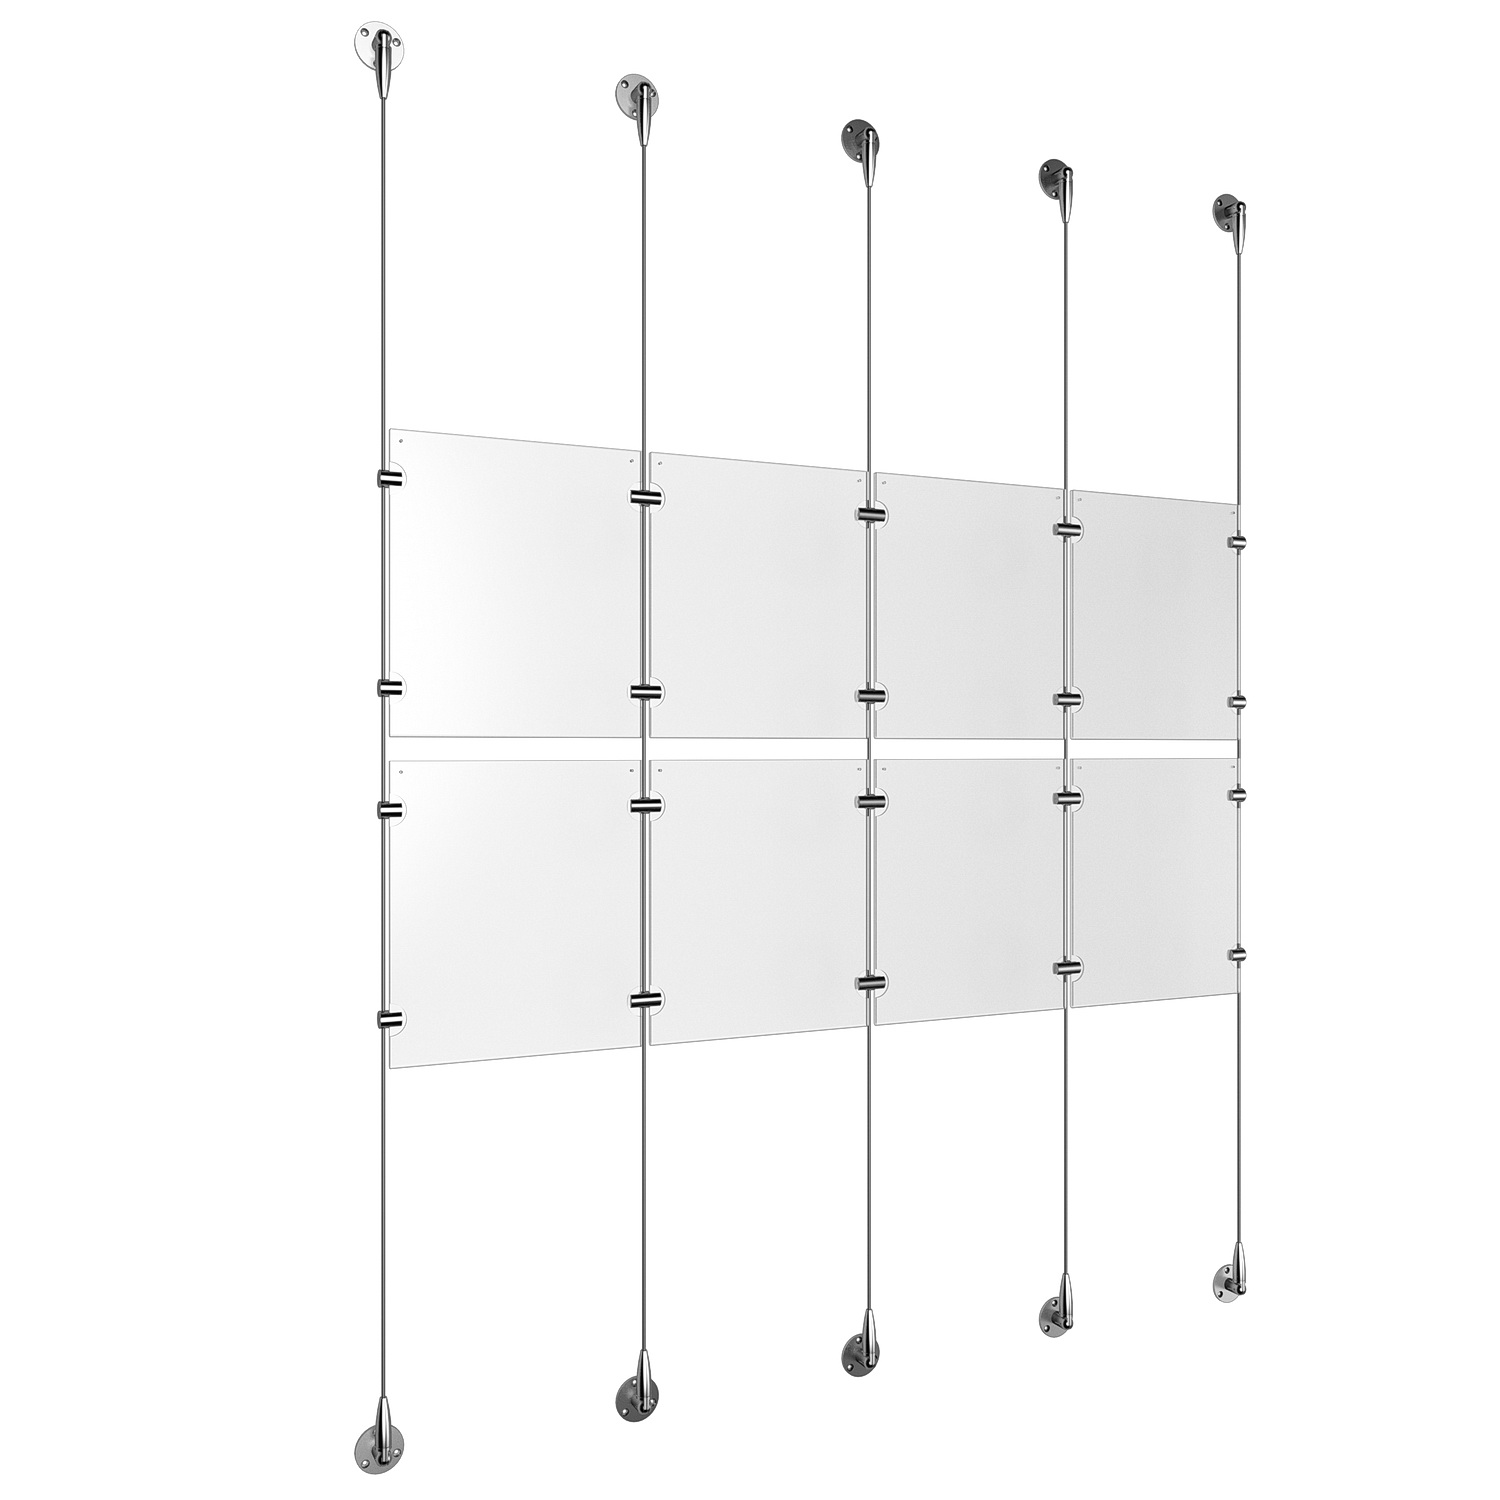 (8) 8-1/2'' Width x 11'' Height Clear Acrylic Frame & (5) Stainless Steel Satin Brushed Adjustable Angle Signature 1/8'' Cable Systems with (8) Single-Sided Panel Grippers (12) Double-Sided Panel Grippers